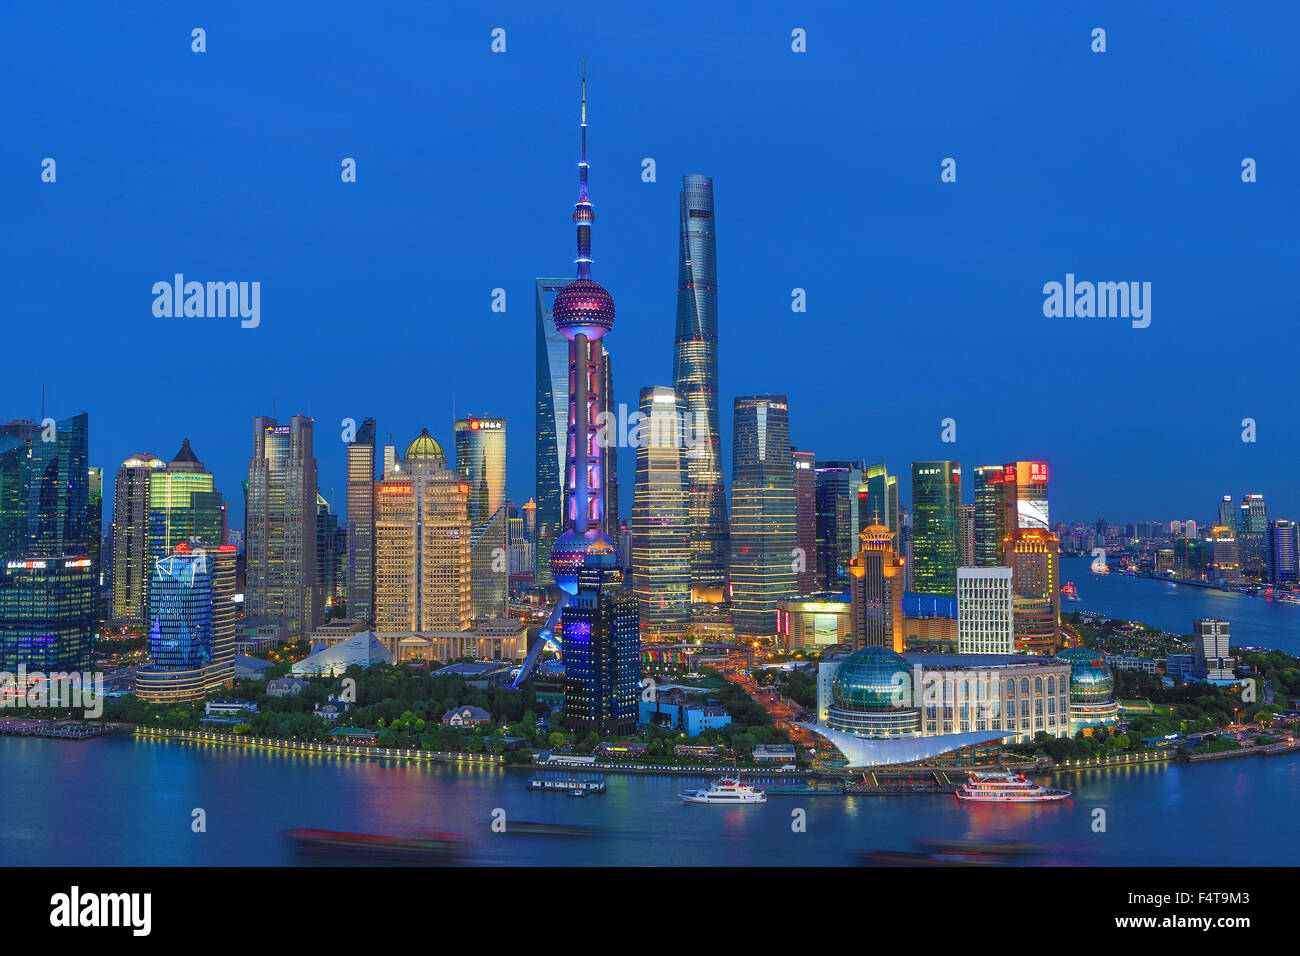 China, Shanghai City, Pudong Skyline, Oriental Pearl, World Financial Center and Shanghai Towers, Huangpu River. Stock Photo